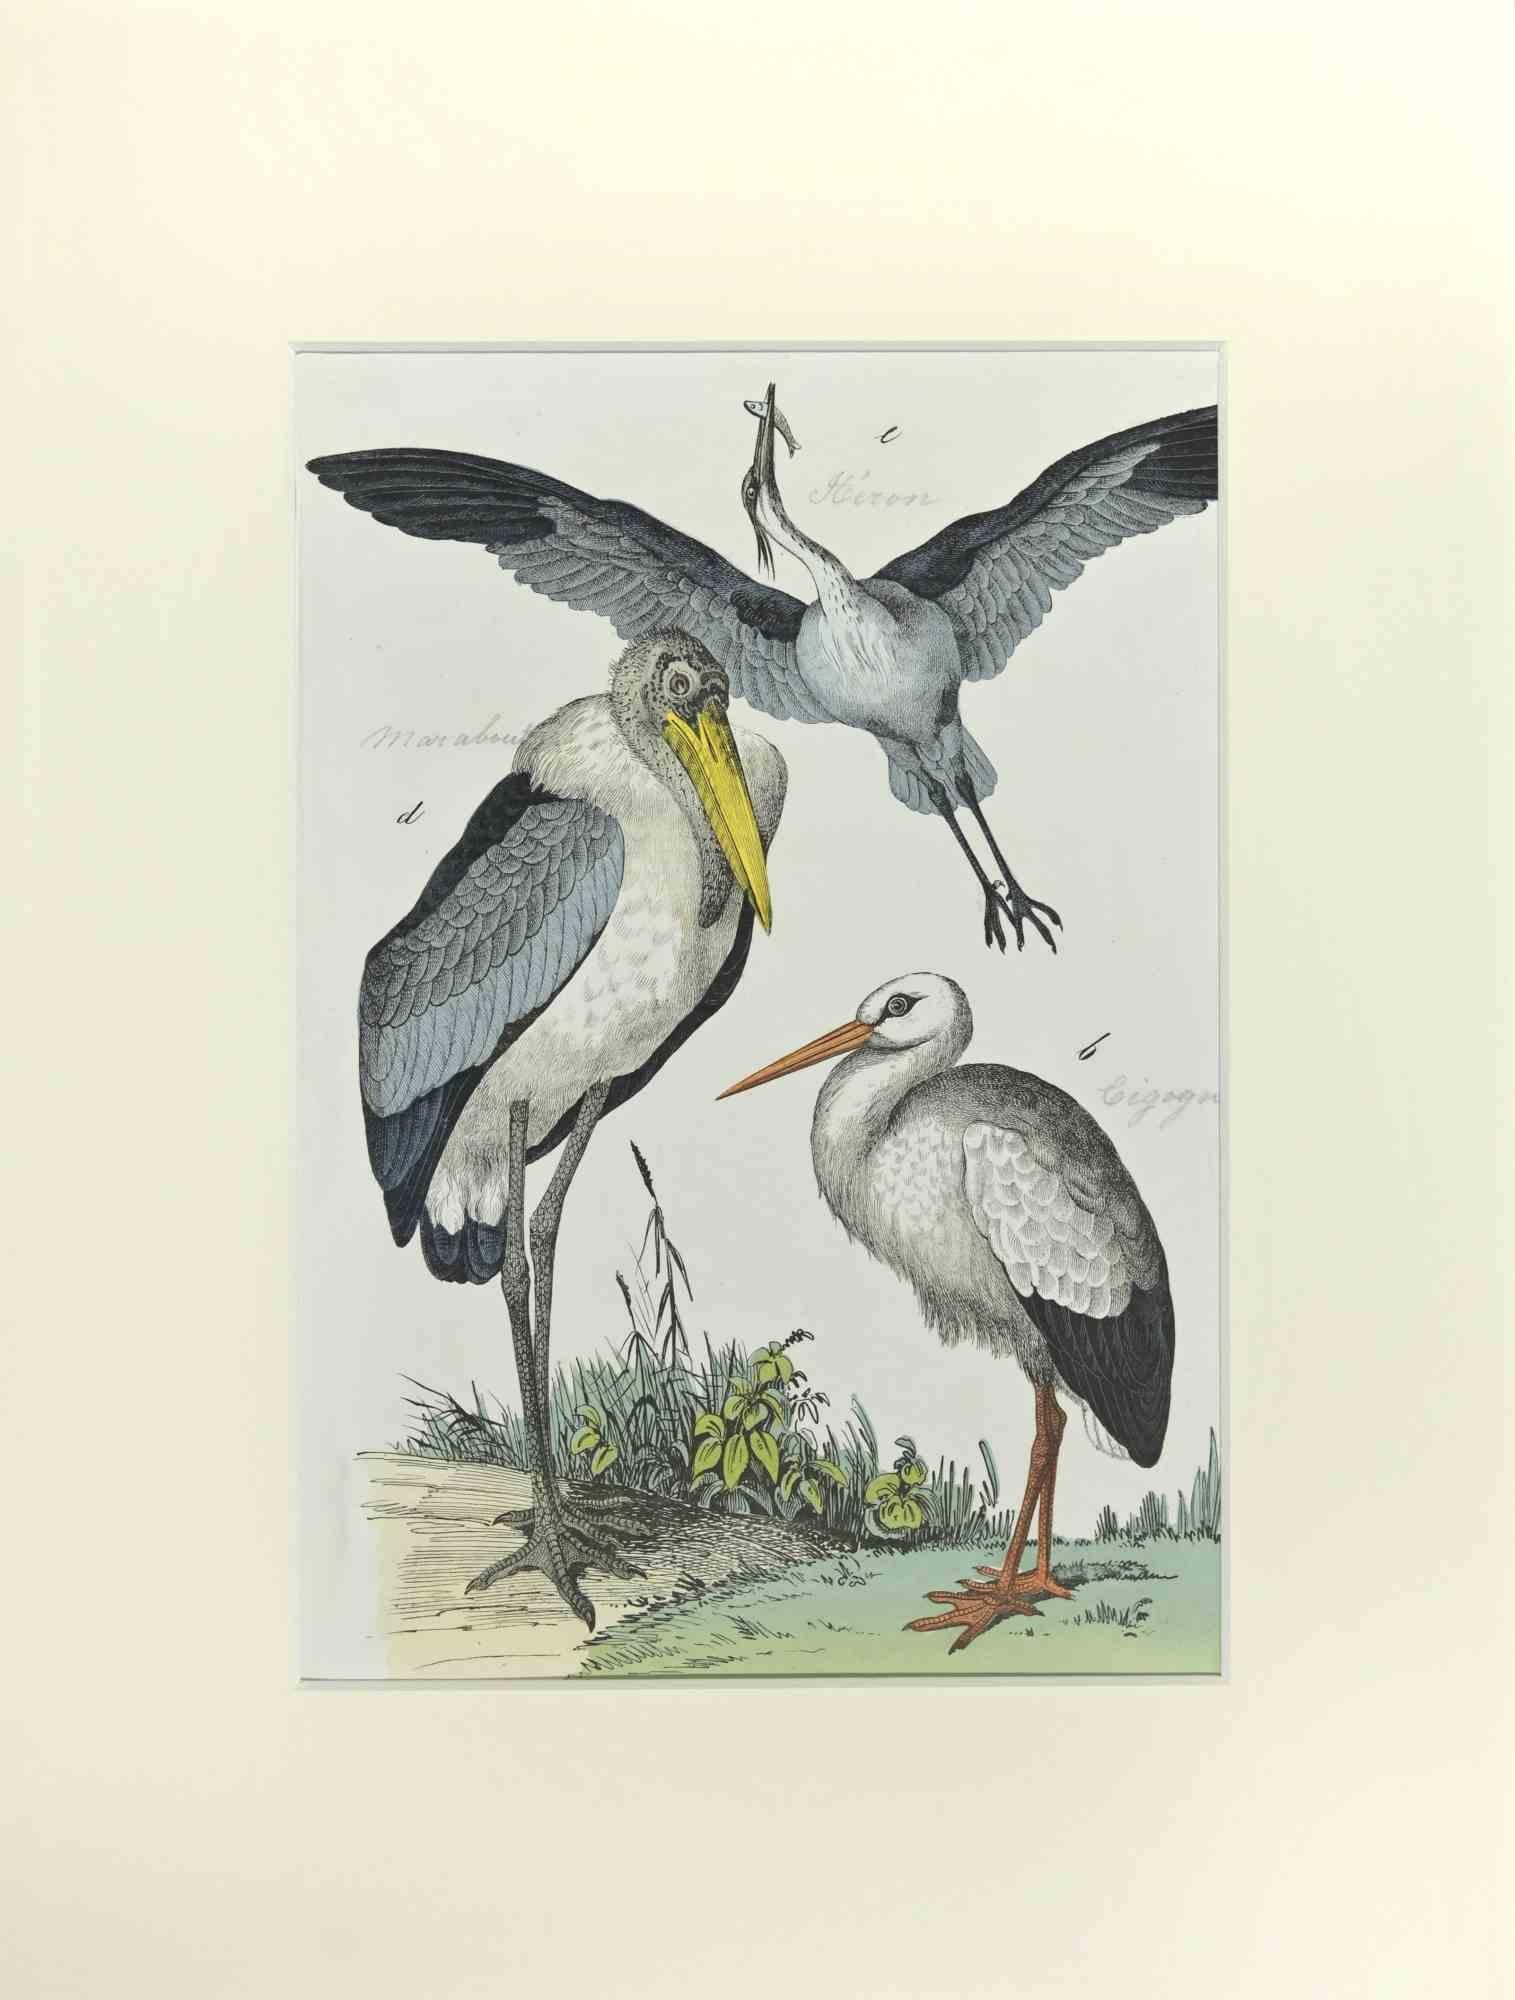 Heron and Stork is an Etching hand colored realized by Gotthilf Heinrich von Schubert - Johann Friedrich Naumann, Illustration from Natural history of birds in pictures, published by Stuttgart and Esslingen, Schreiber and Schill 1840 ca.